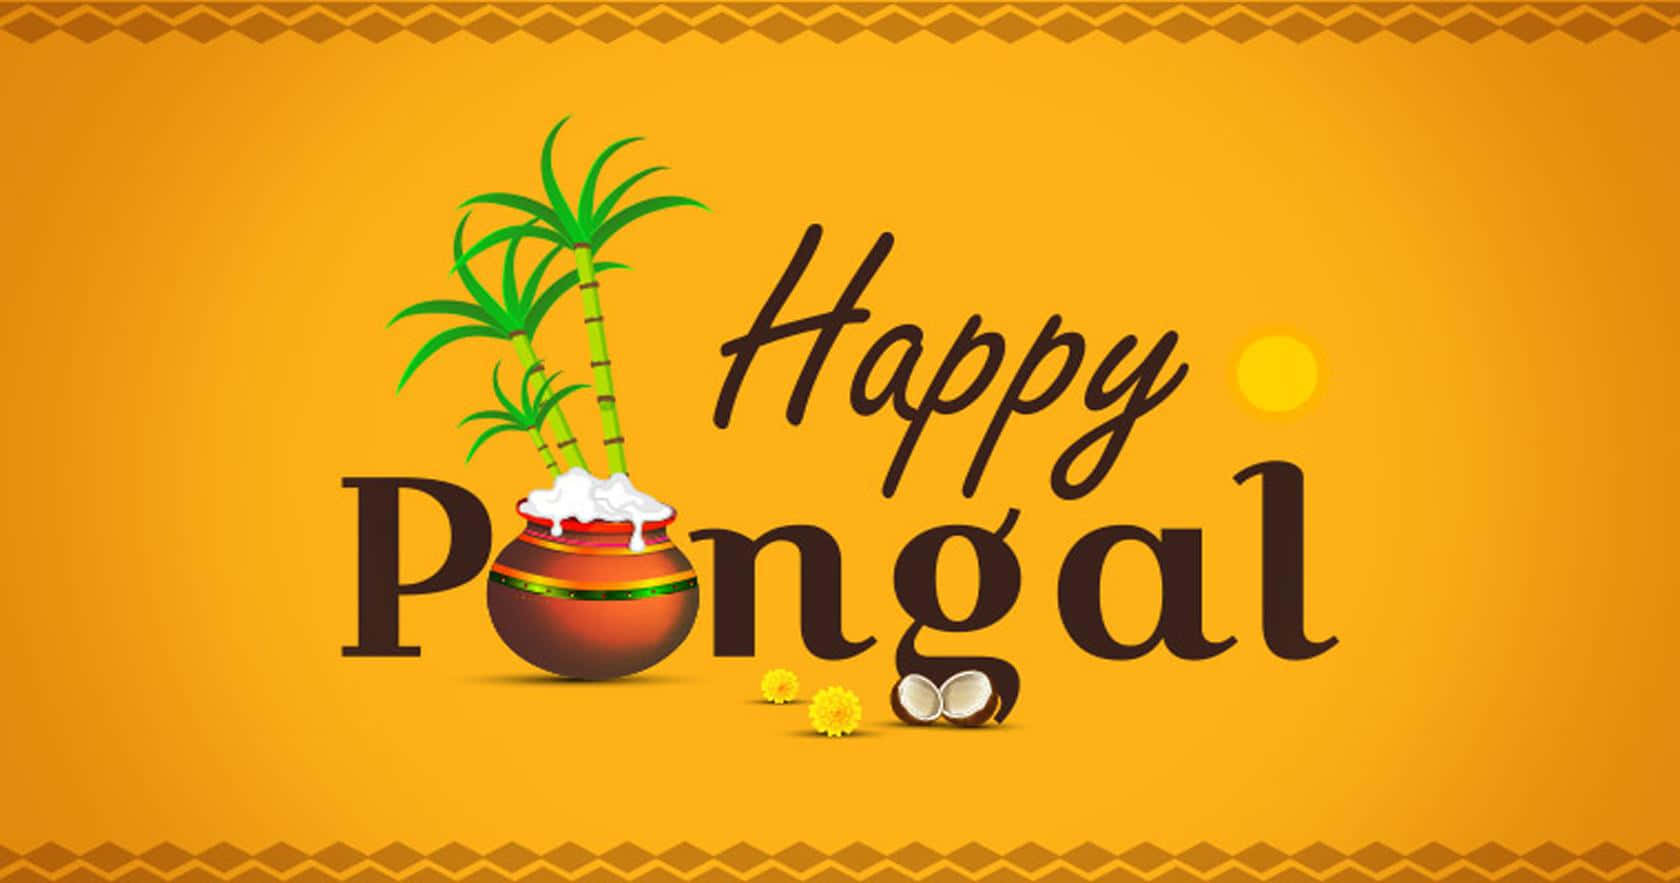 Happy Pongal Greetings With A Coconut And Bananas